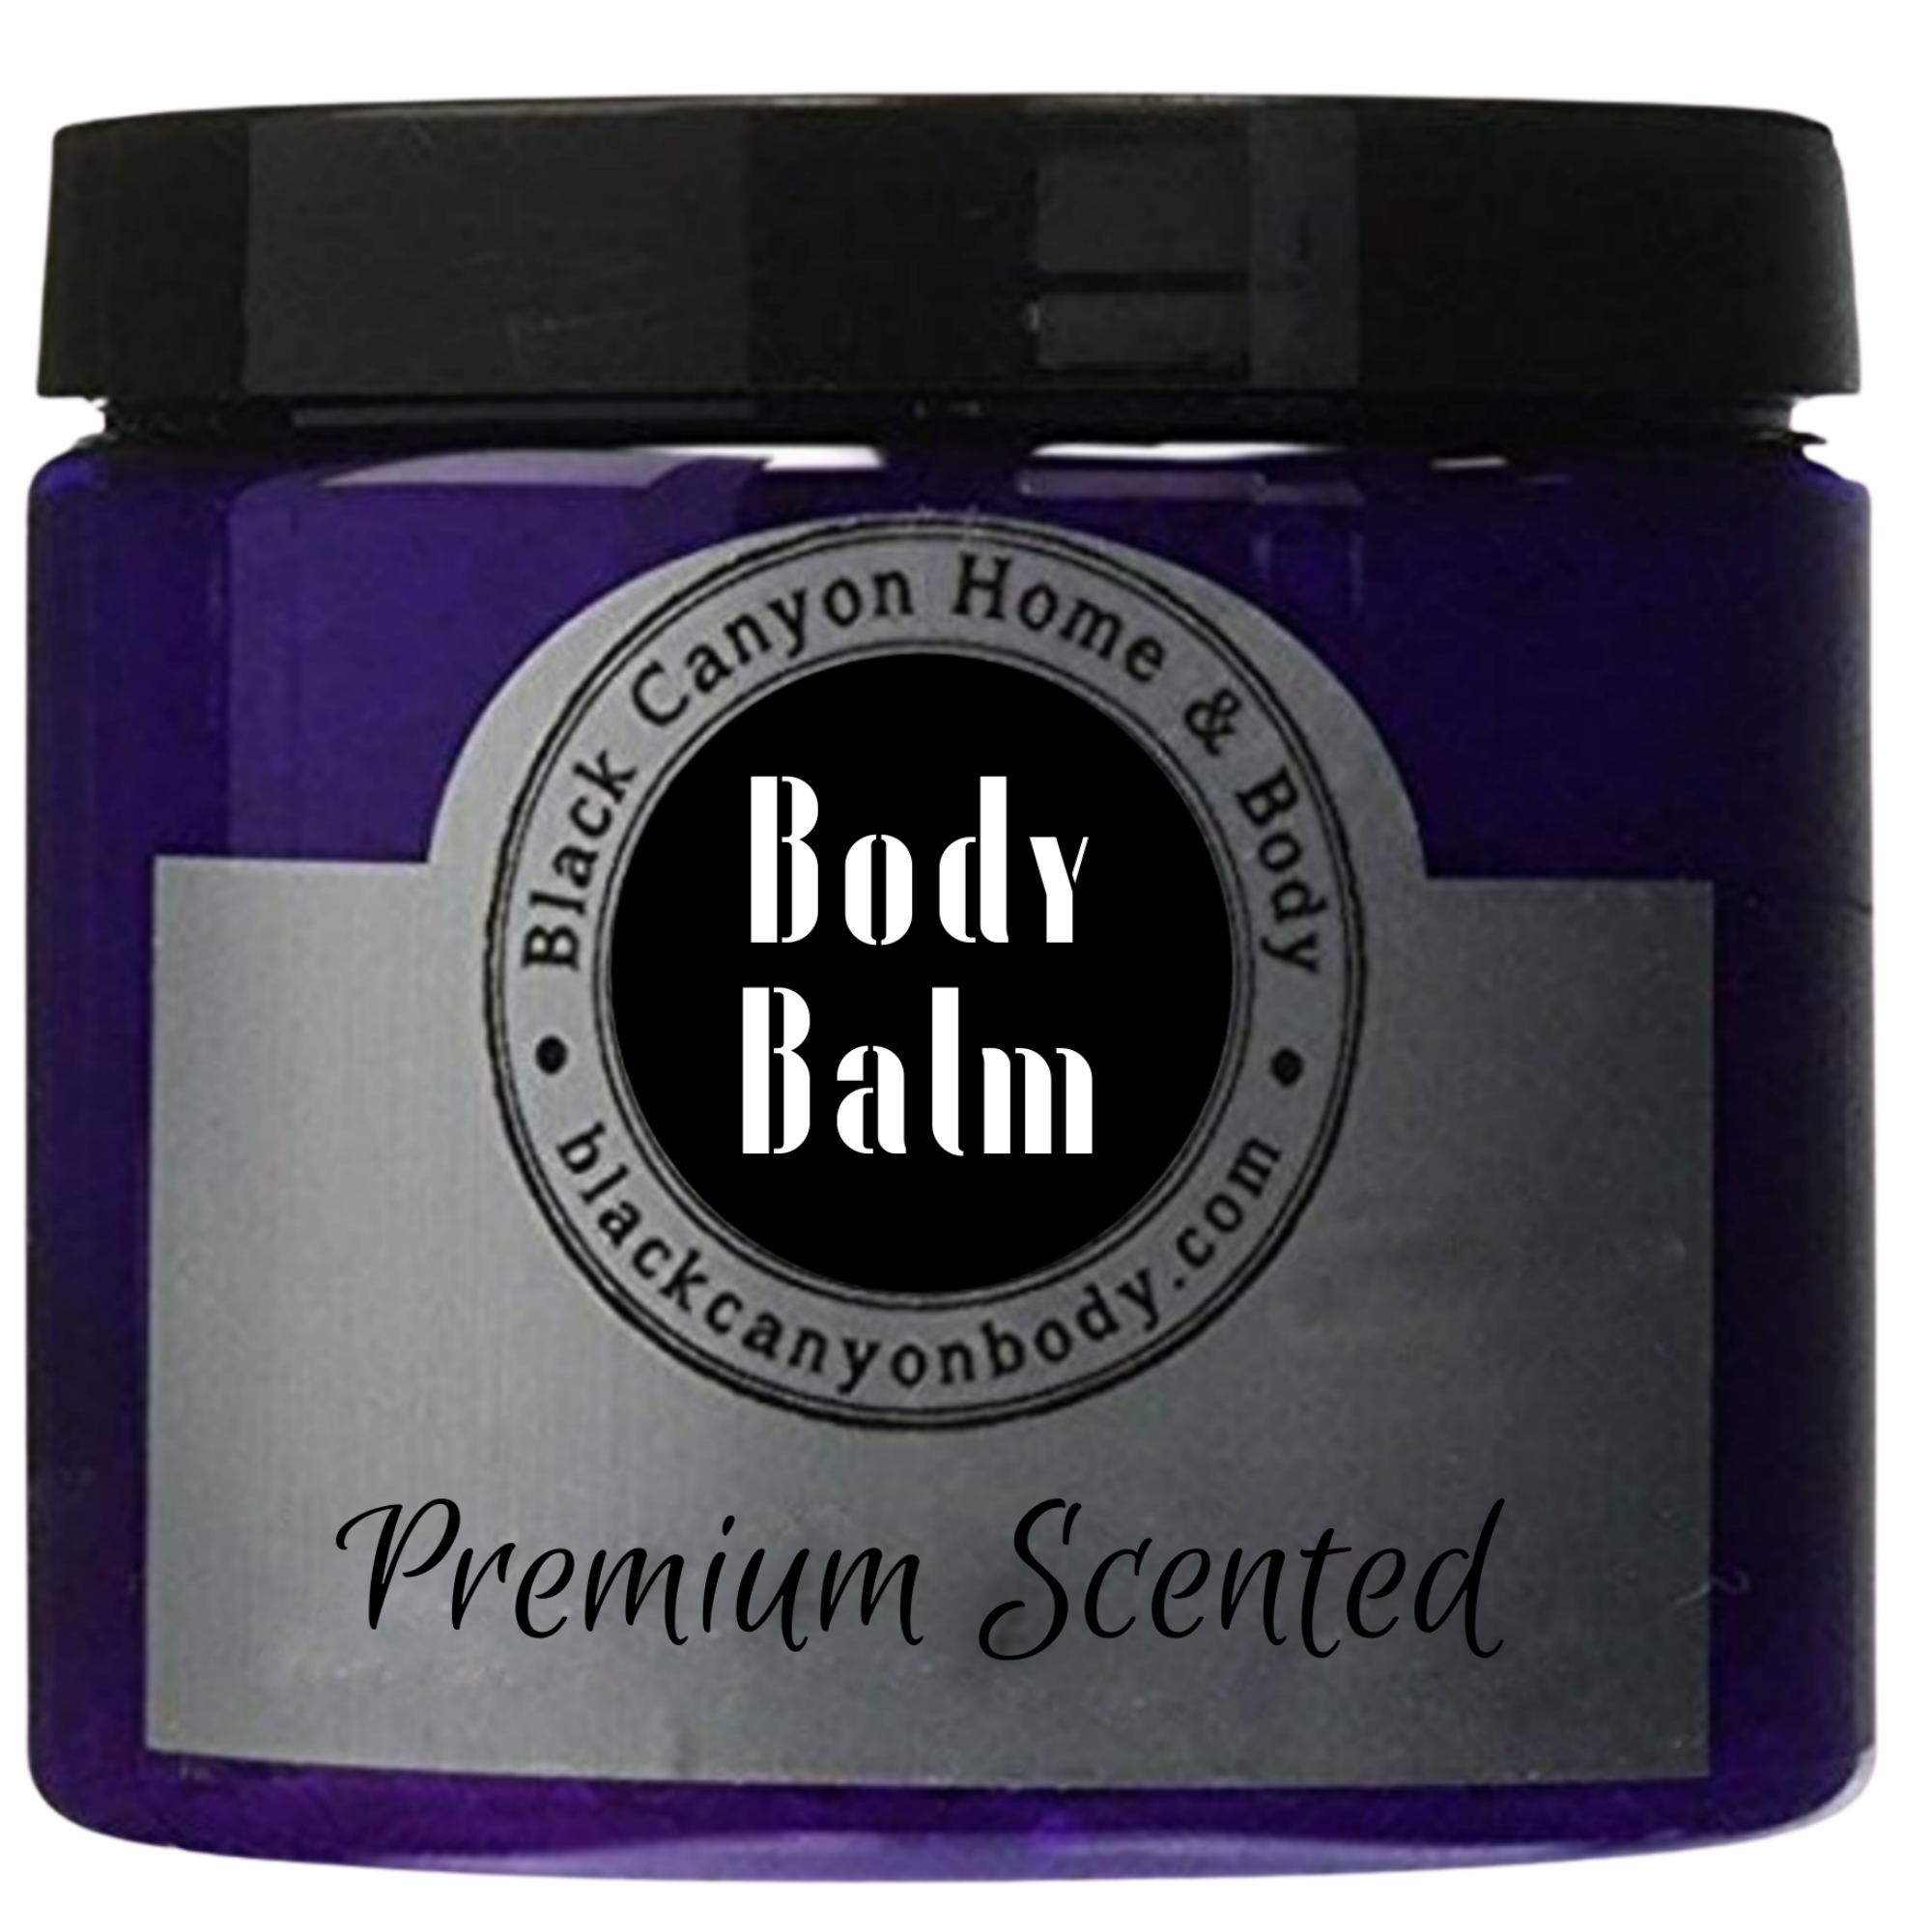 Black Canyon Butt Naked Scented Natural Body Balm with Shea